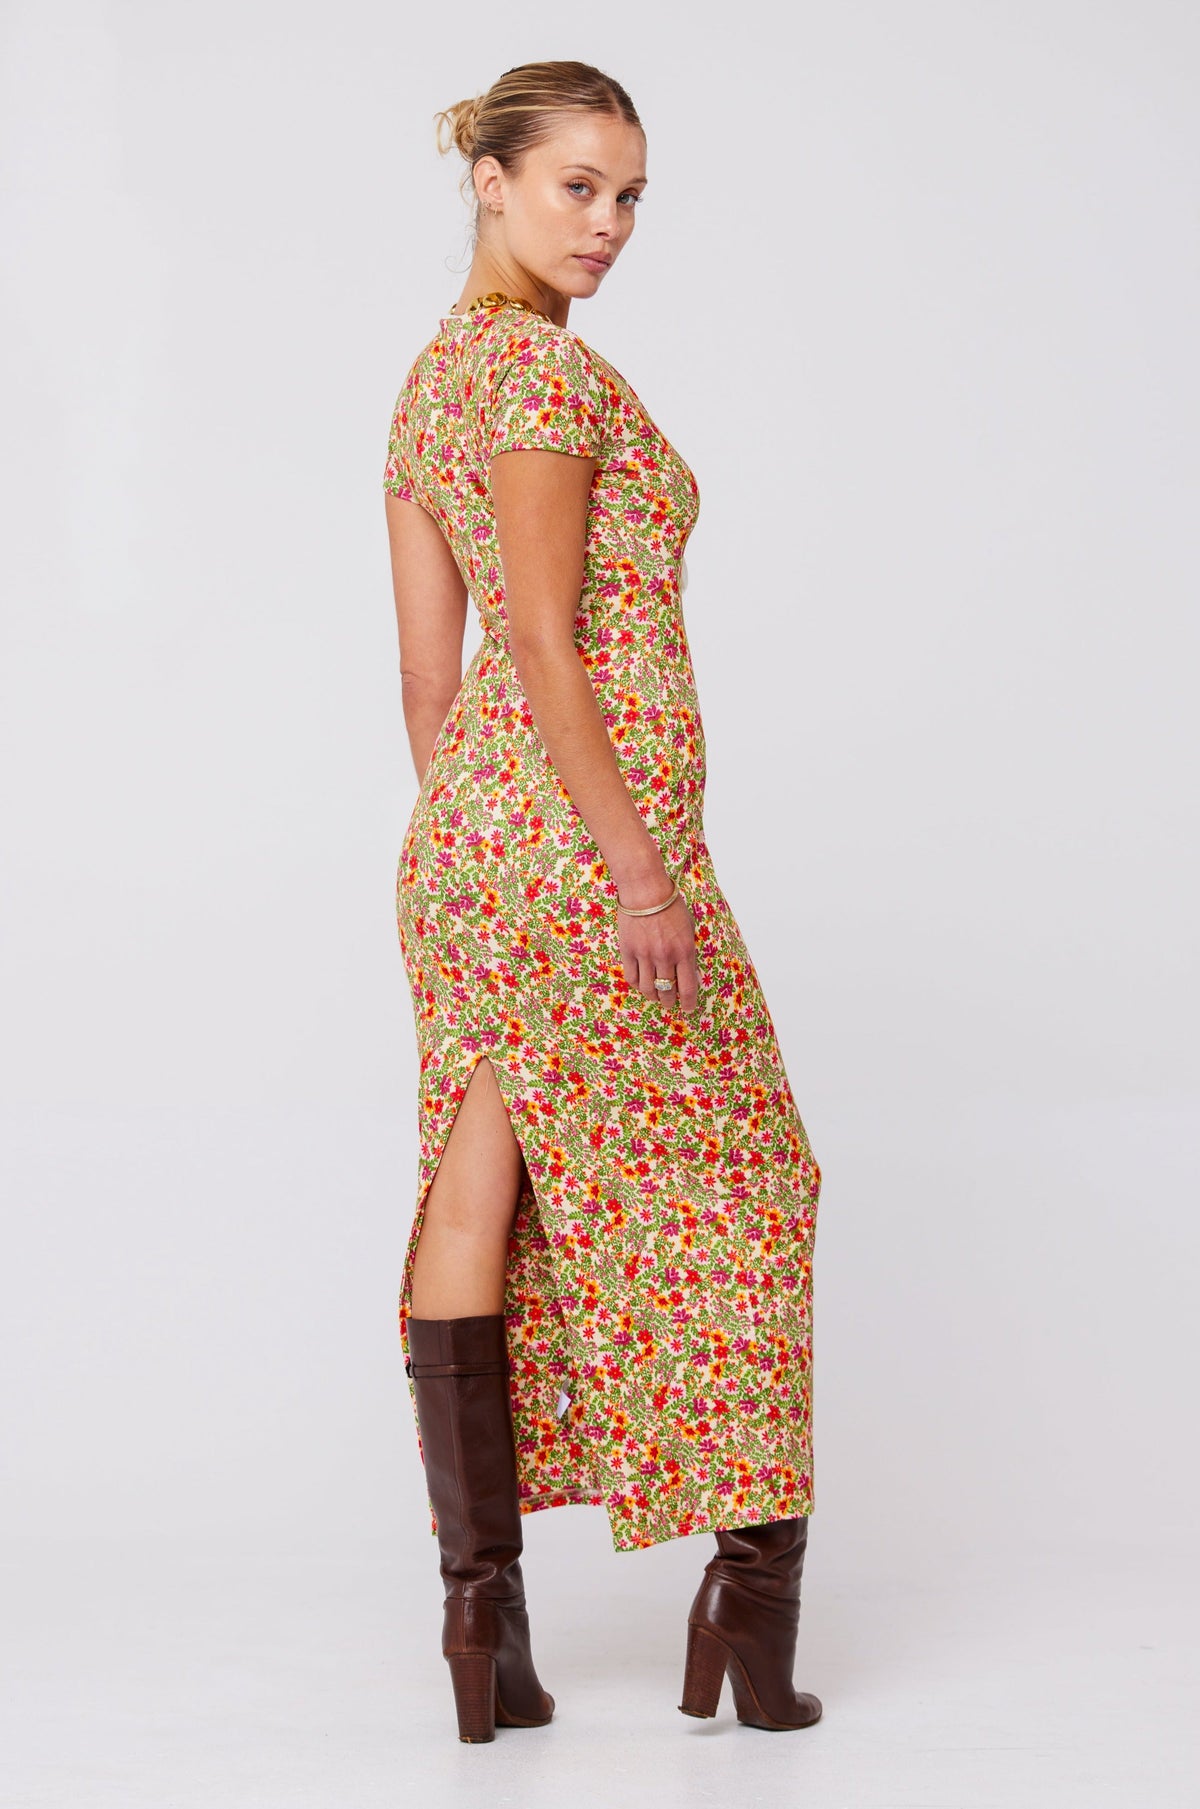 This is an image of Farrah Dress in Fleetwood - RESA featuring a model wearing the dress